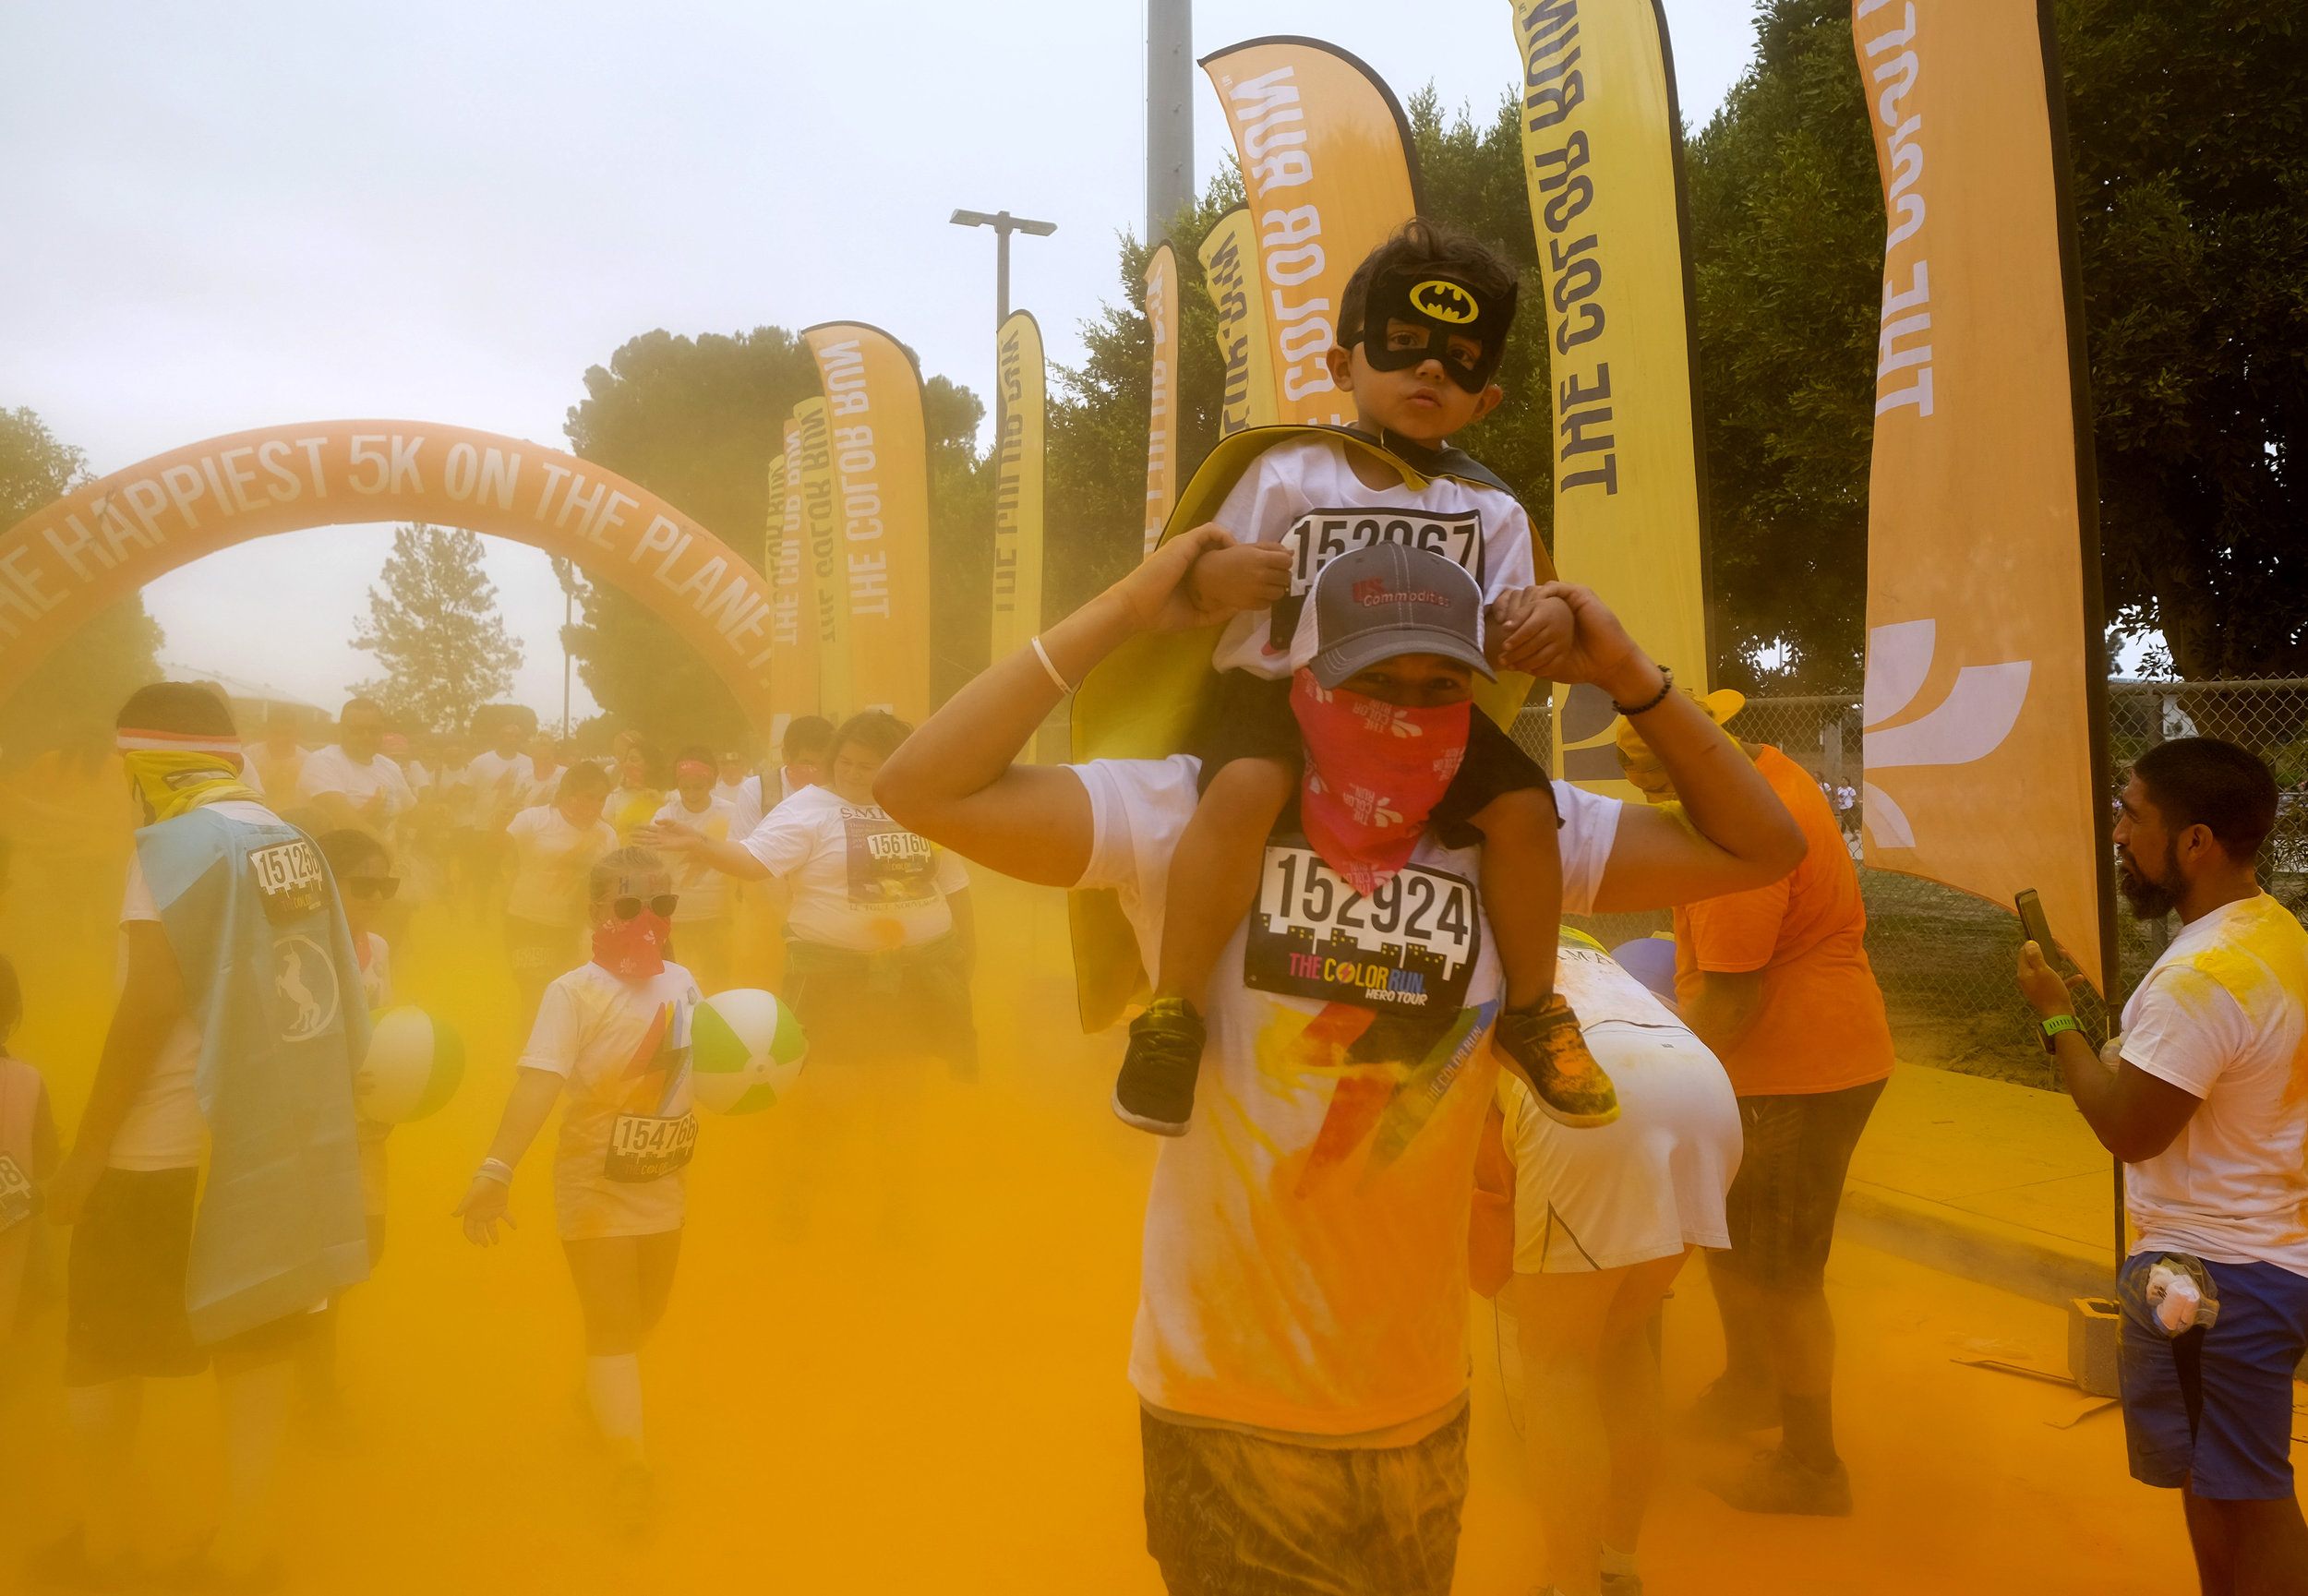  Runners revel while running through clouds of colorful powder thrown by volunteers in the Color Run at the StubHub Center in Los Angeles, United States, June 23, 2018.  